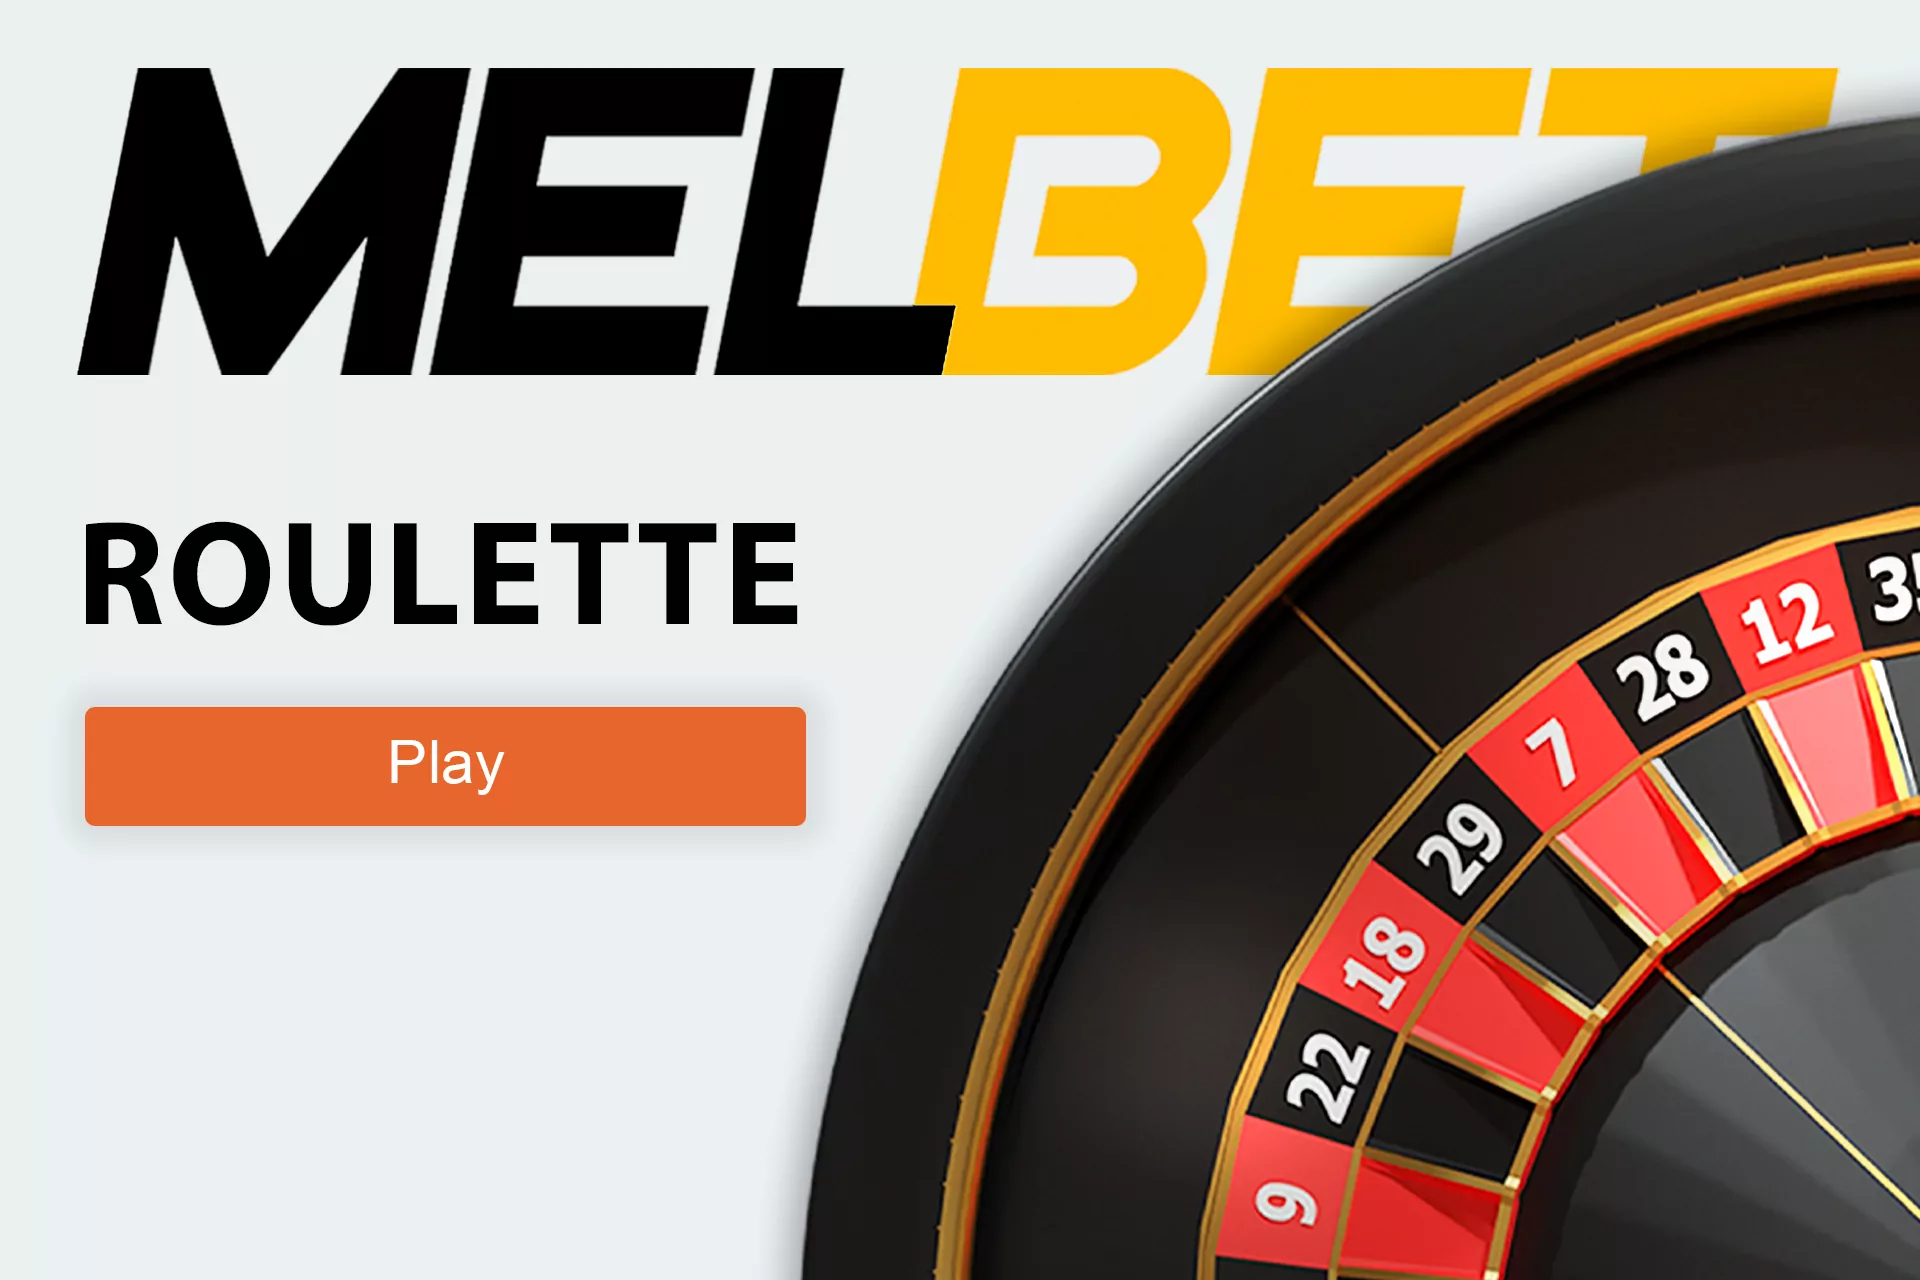 There are lots of variants of roulette at Melbet available to be played.